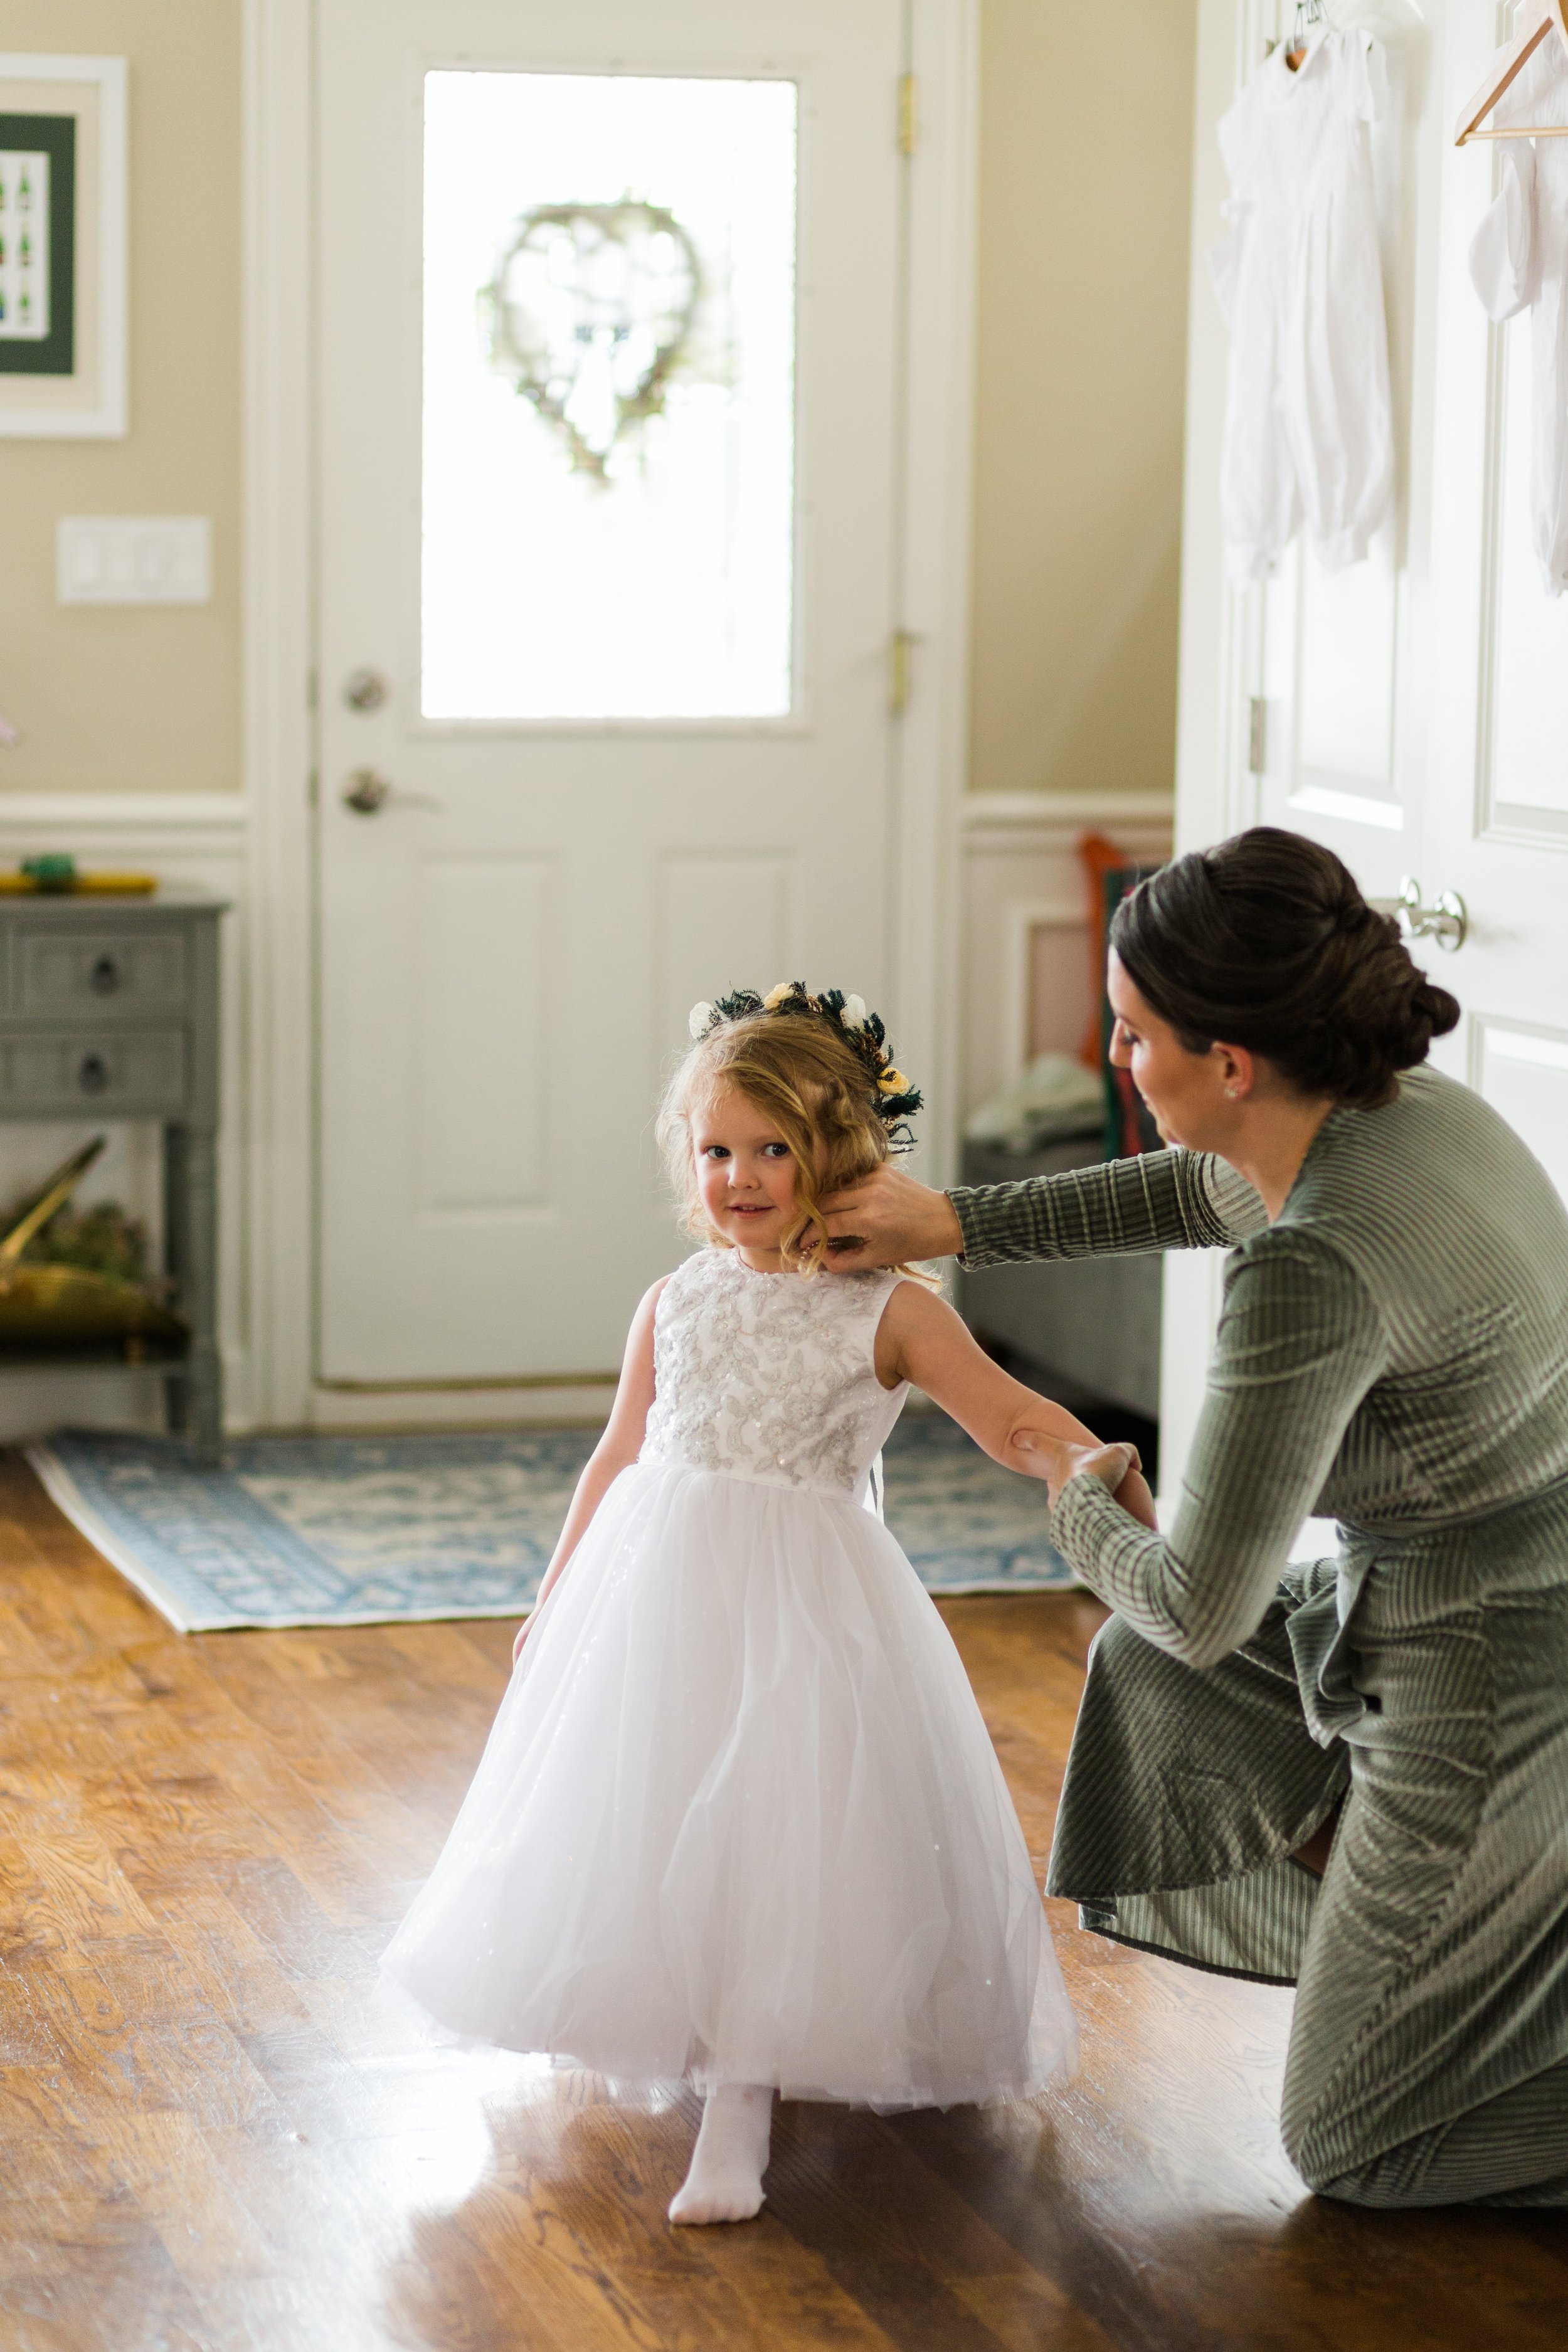  Candid documentary style wedding photo of a bridesmaid in a green velvet dress helping a young flower girl into her white dress while getting ready for an intimate wedding at home in Portage Park Chicago. 